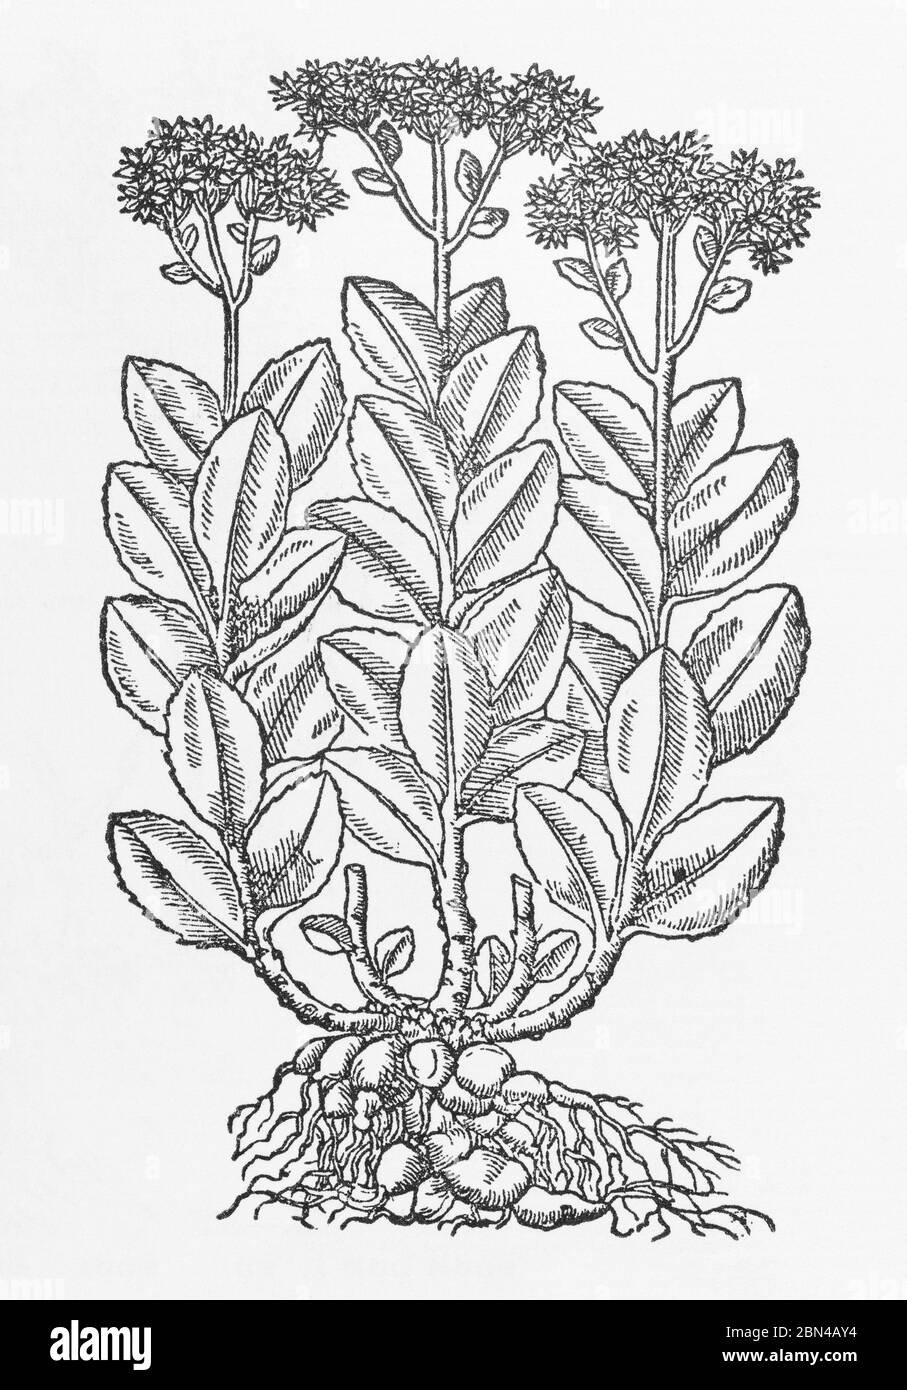 White Orpine / Sedum telephium plant woodcut from Gerarde's Herball, History of Plants. He refers to it as Common Orpyne. P416 Stock Photo